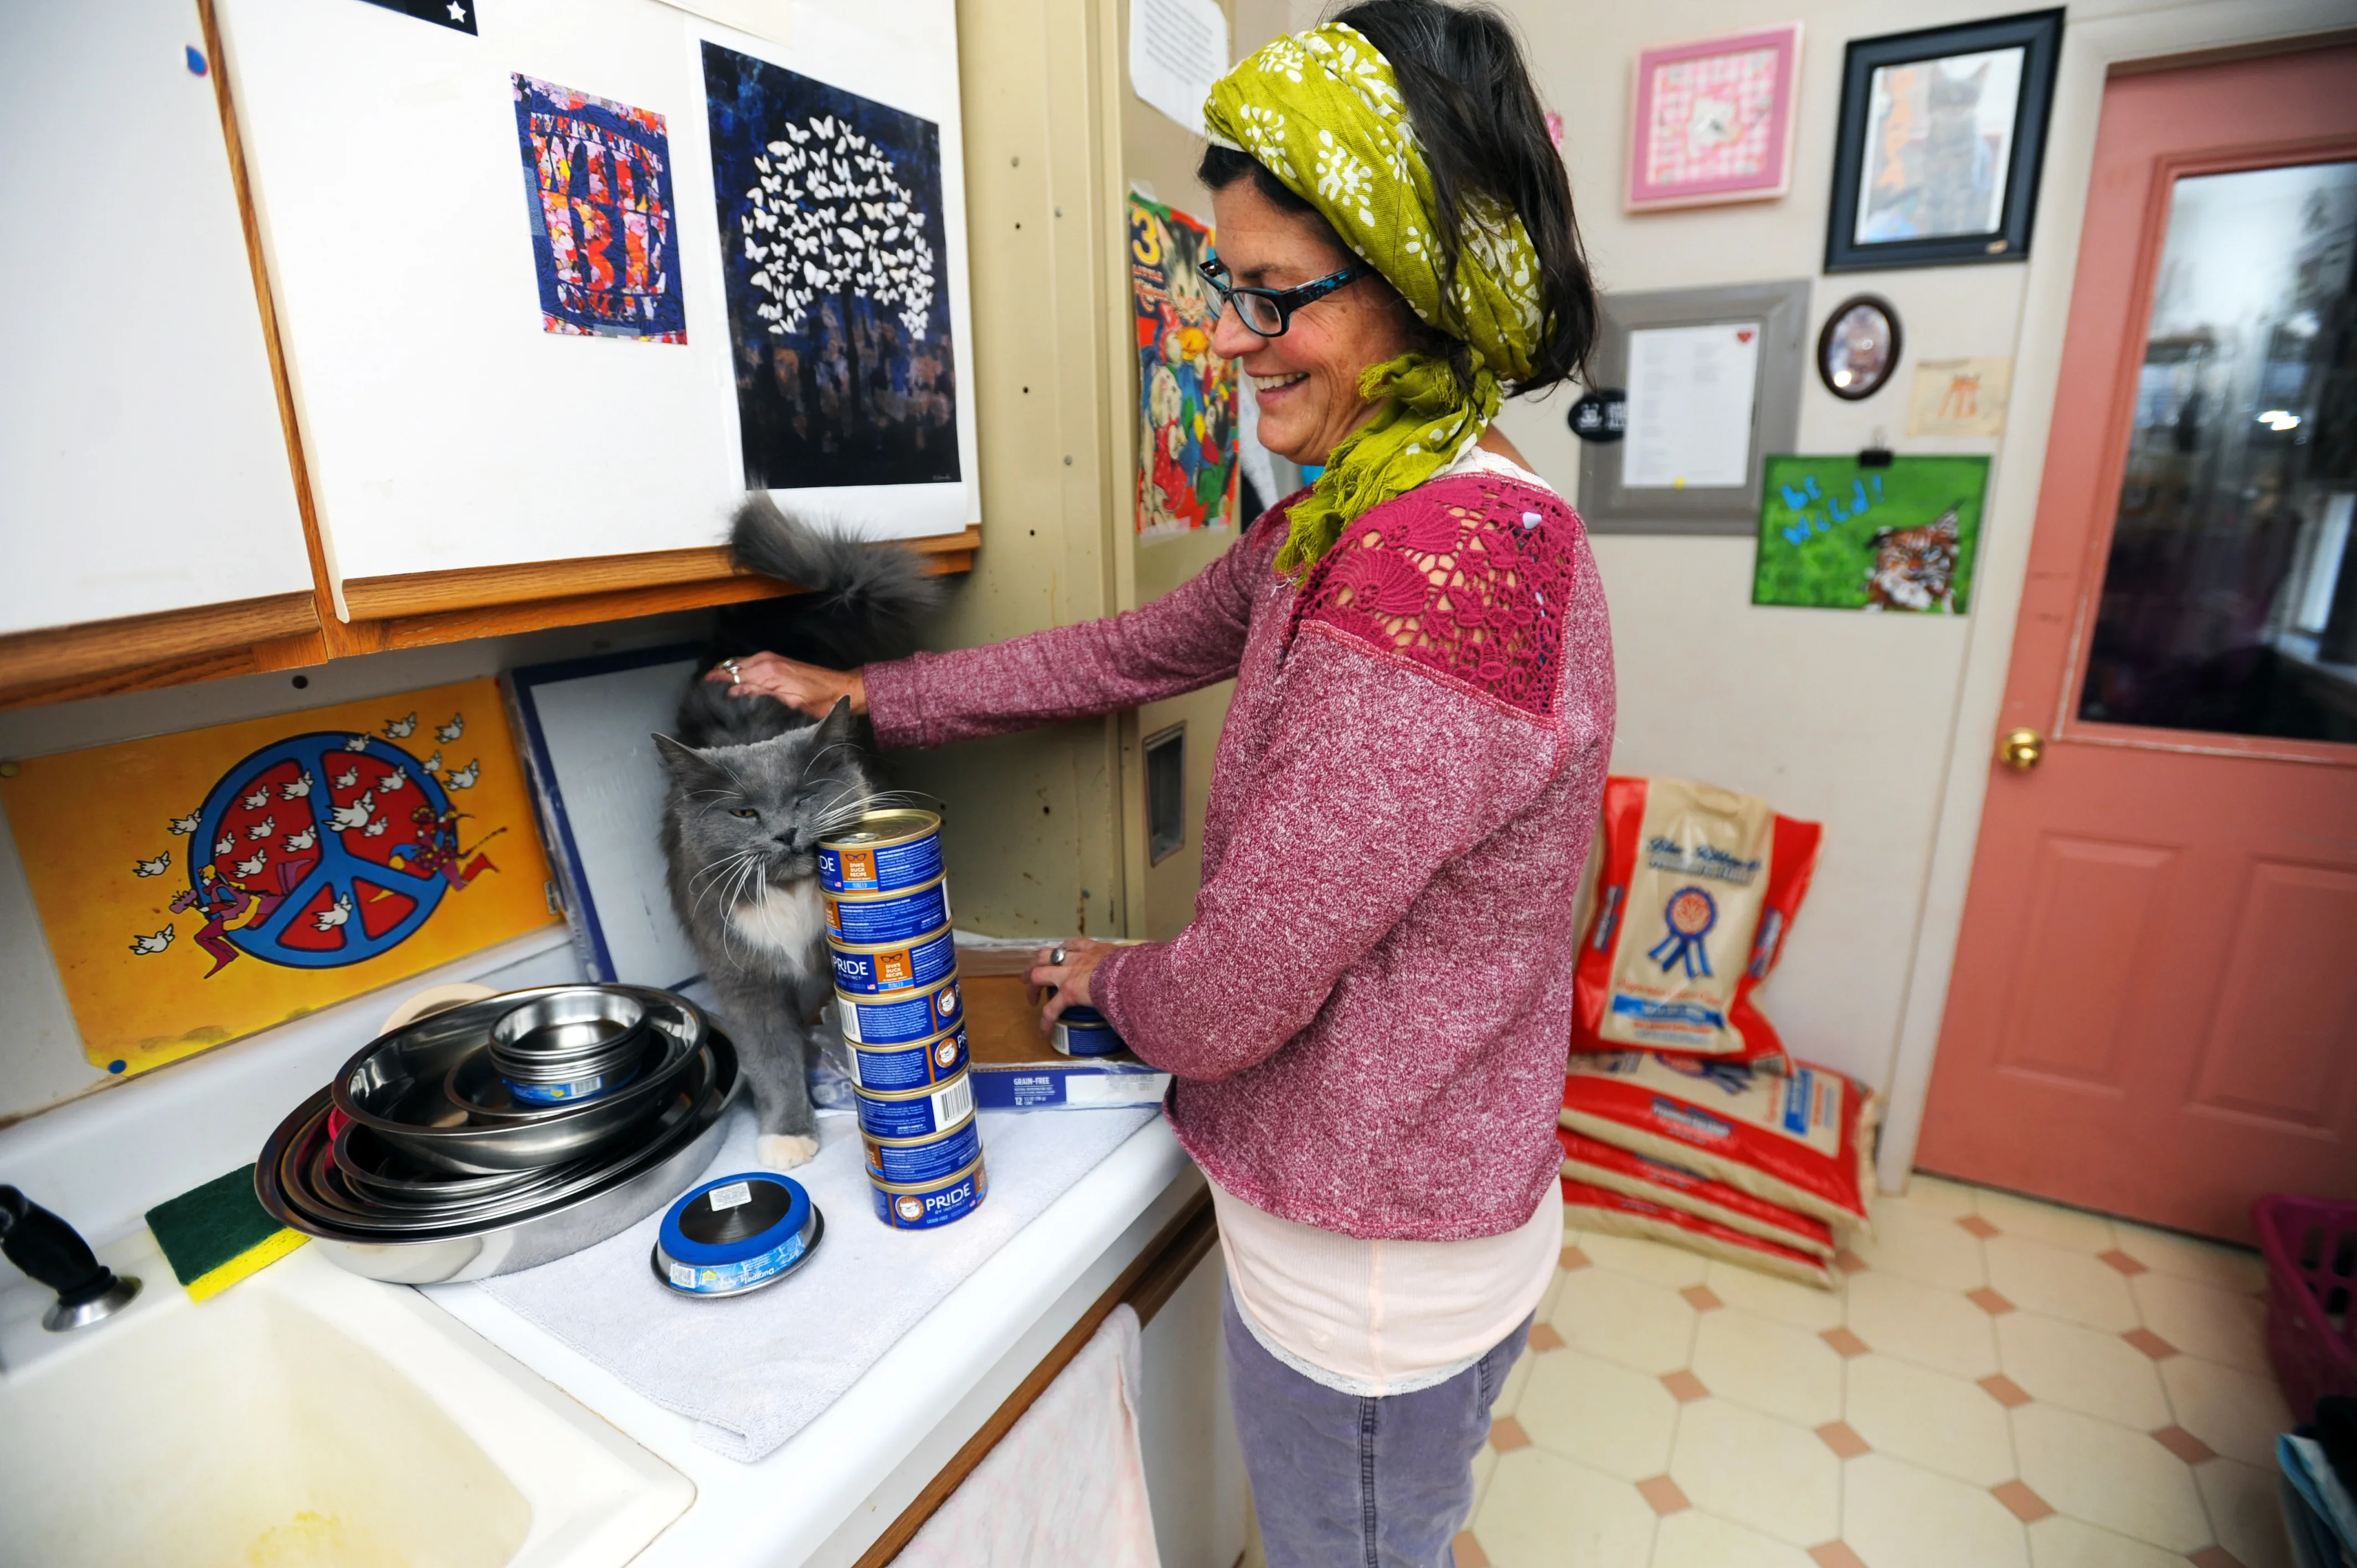 Smiling person feeding a cat in a kitchen